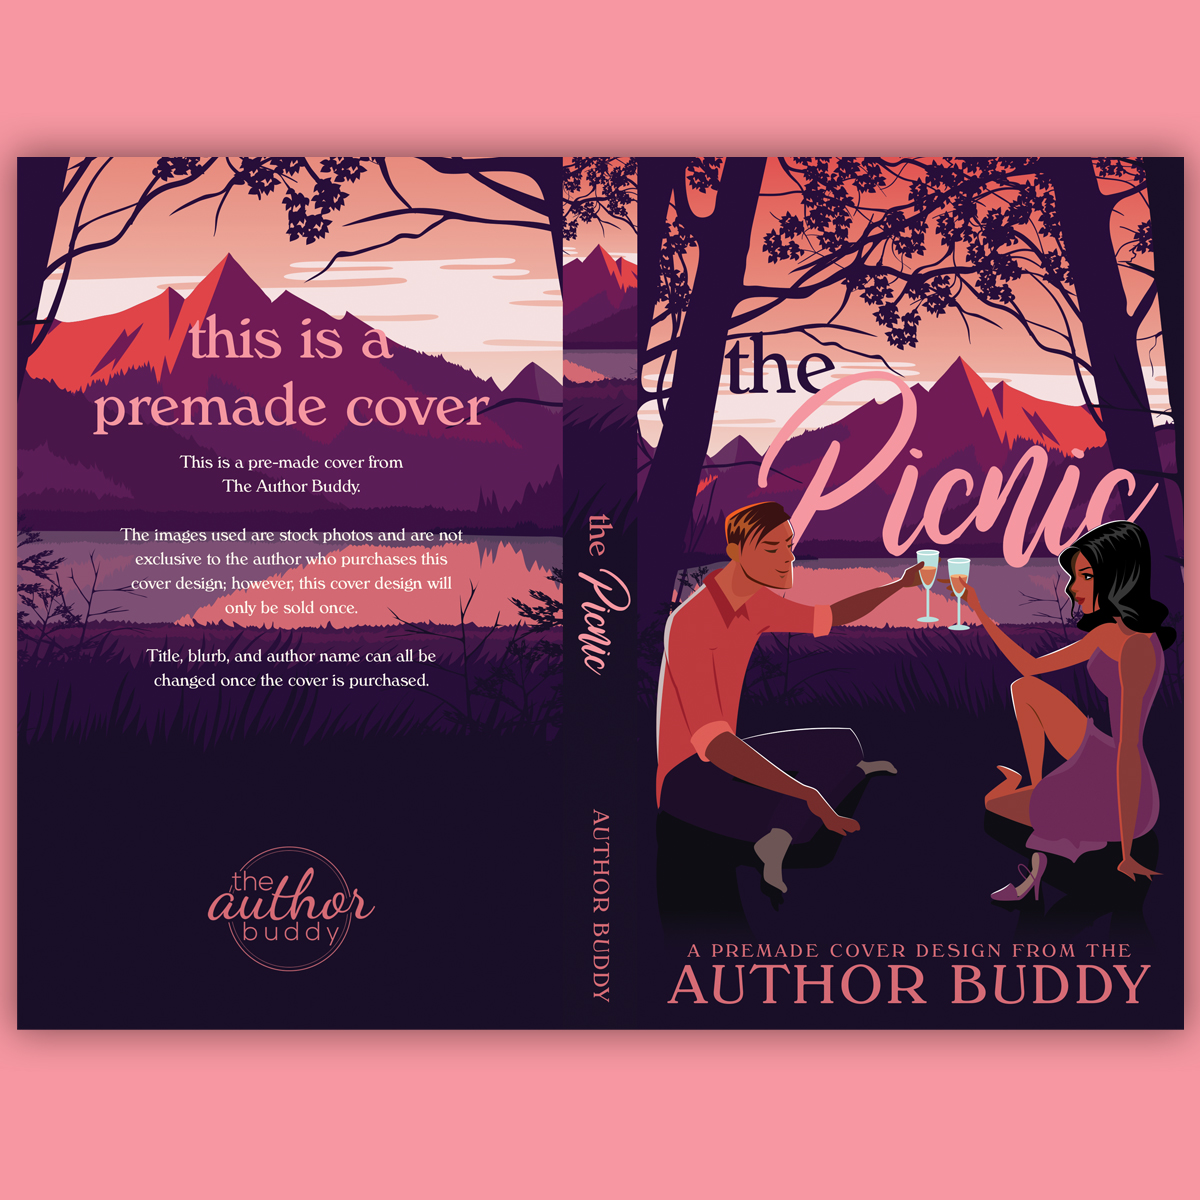 The　Picnic　Author　–　The　Buddy